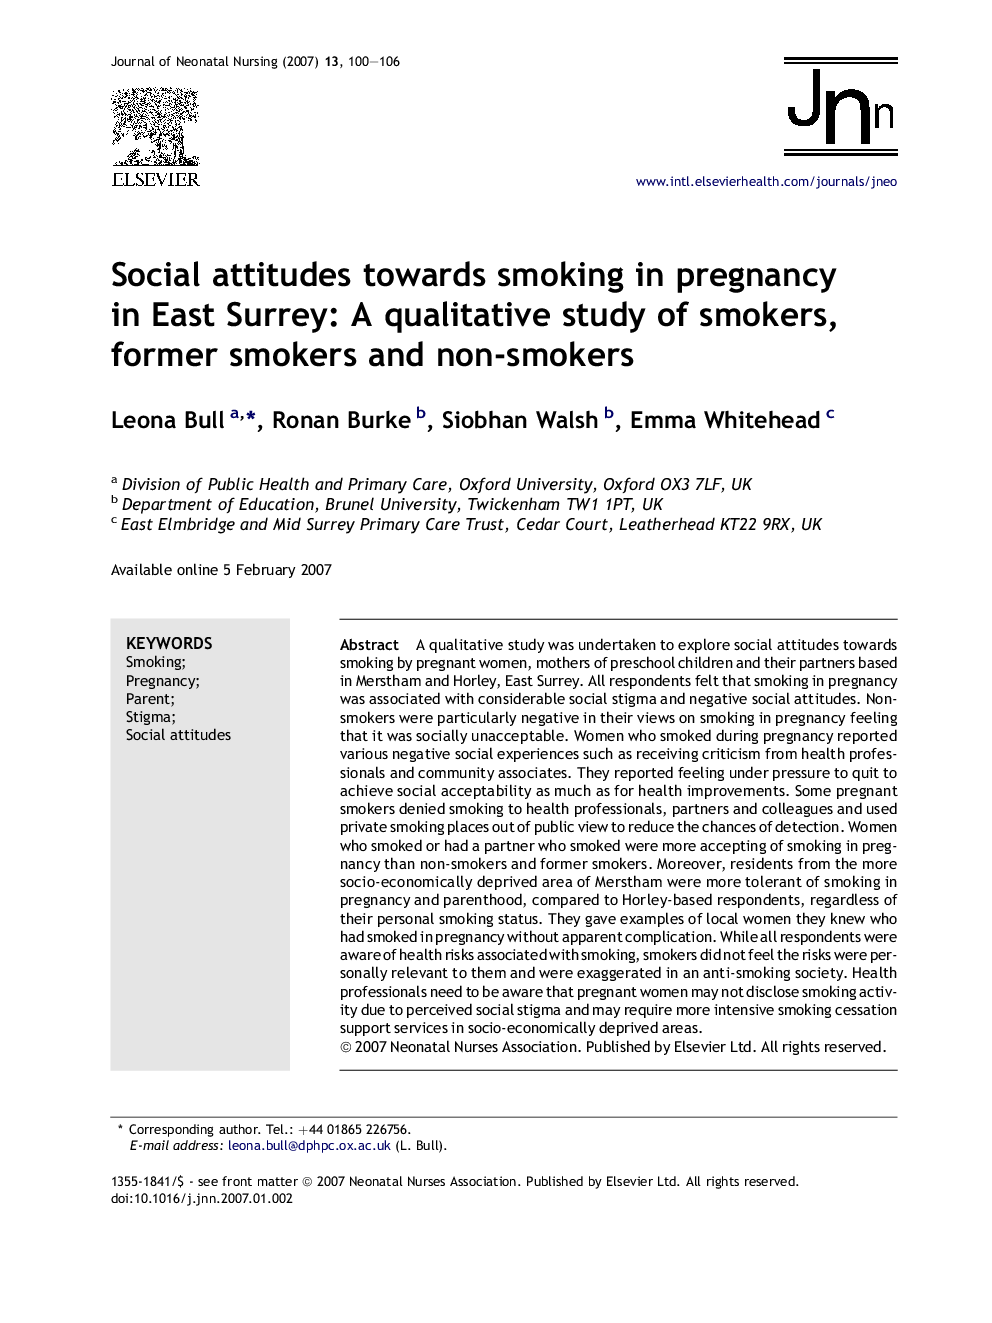 Social attitudes towards smoking in pregnancy in East Surrey: A qualitative study of smokers, former smokers and non-smokers